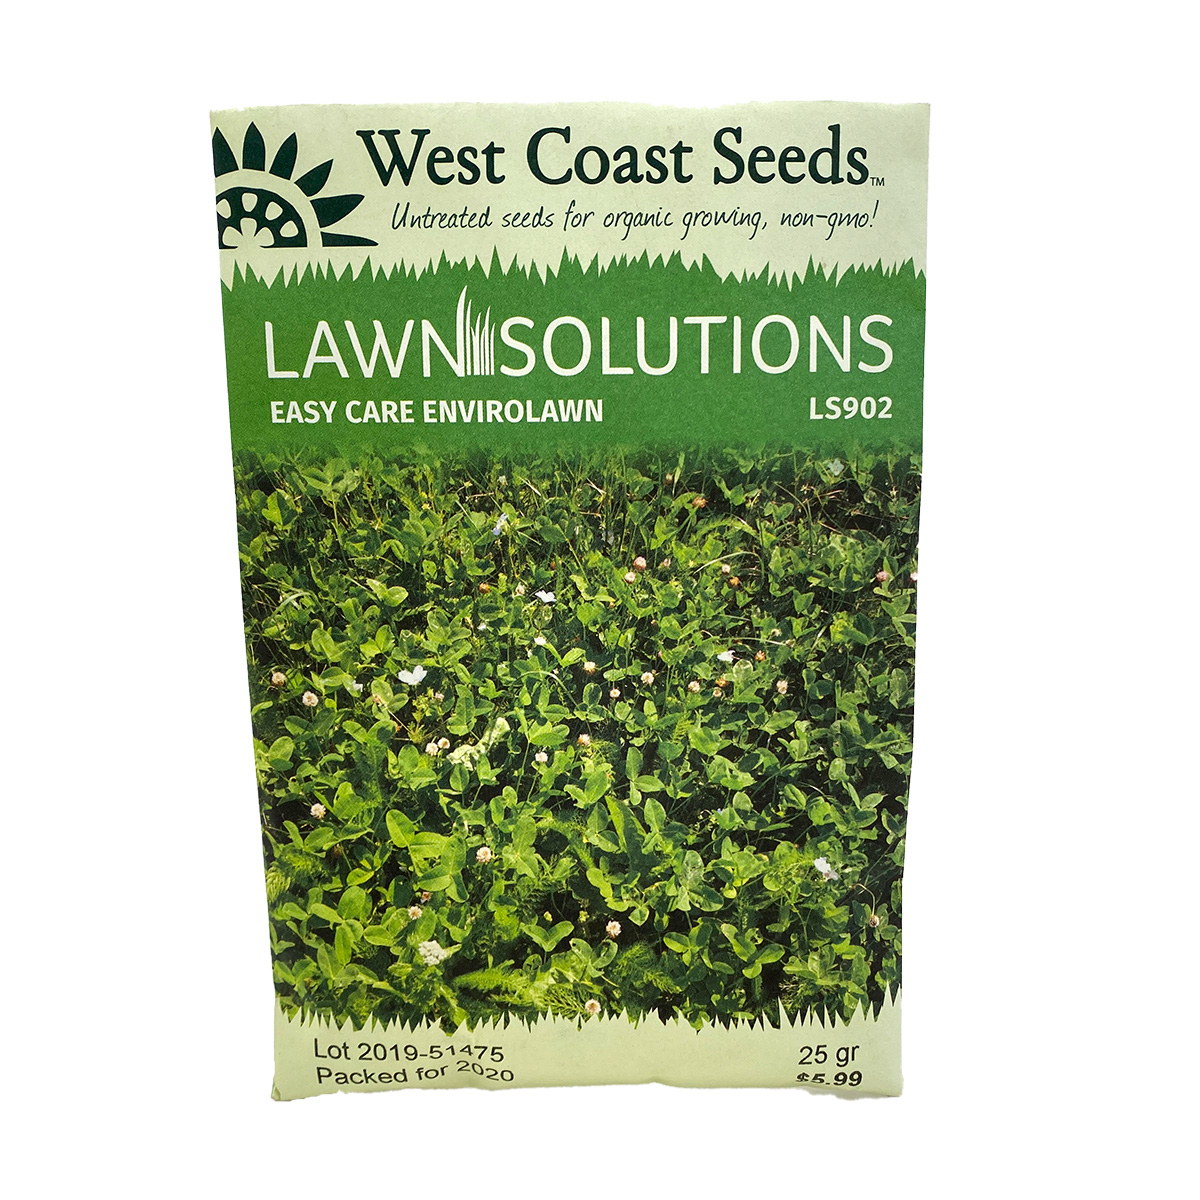 Easy Care Envirolawn Lawn Solutions 25g